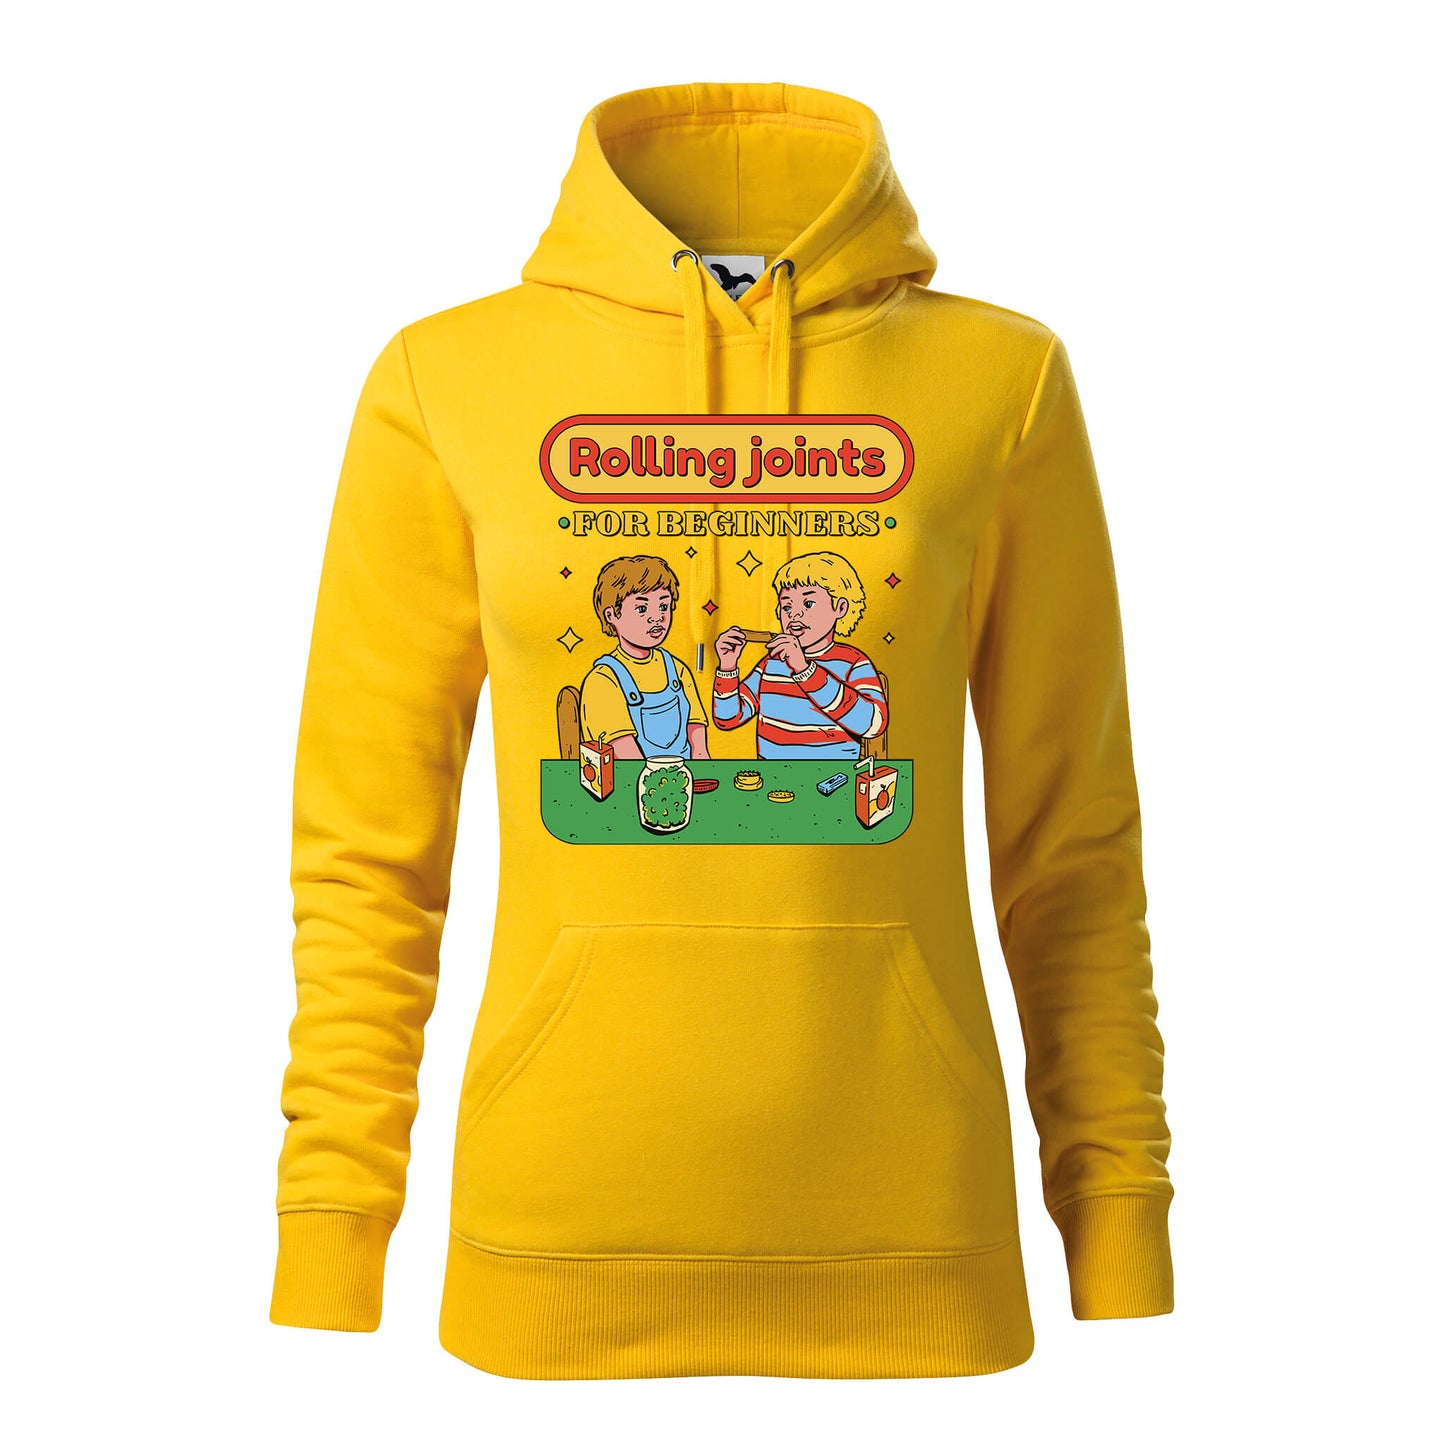 Rolling joints hoodie - rvdesignprint